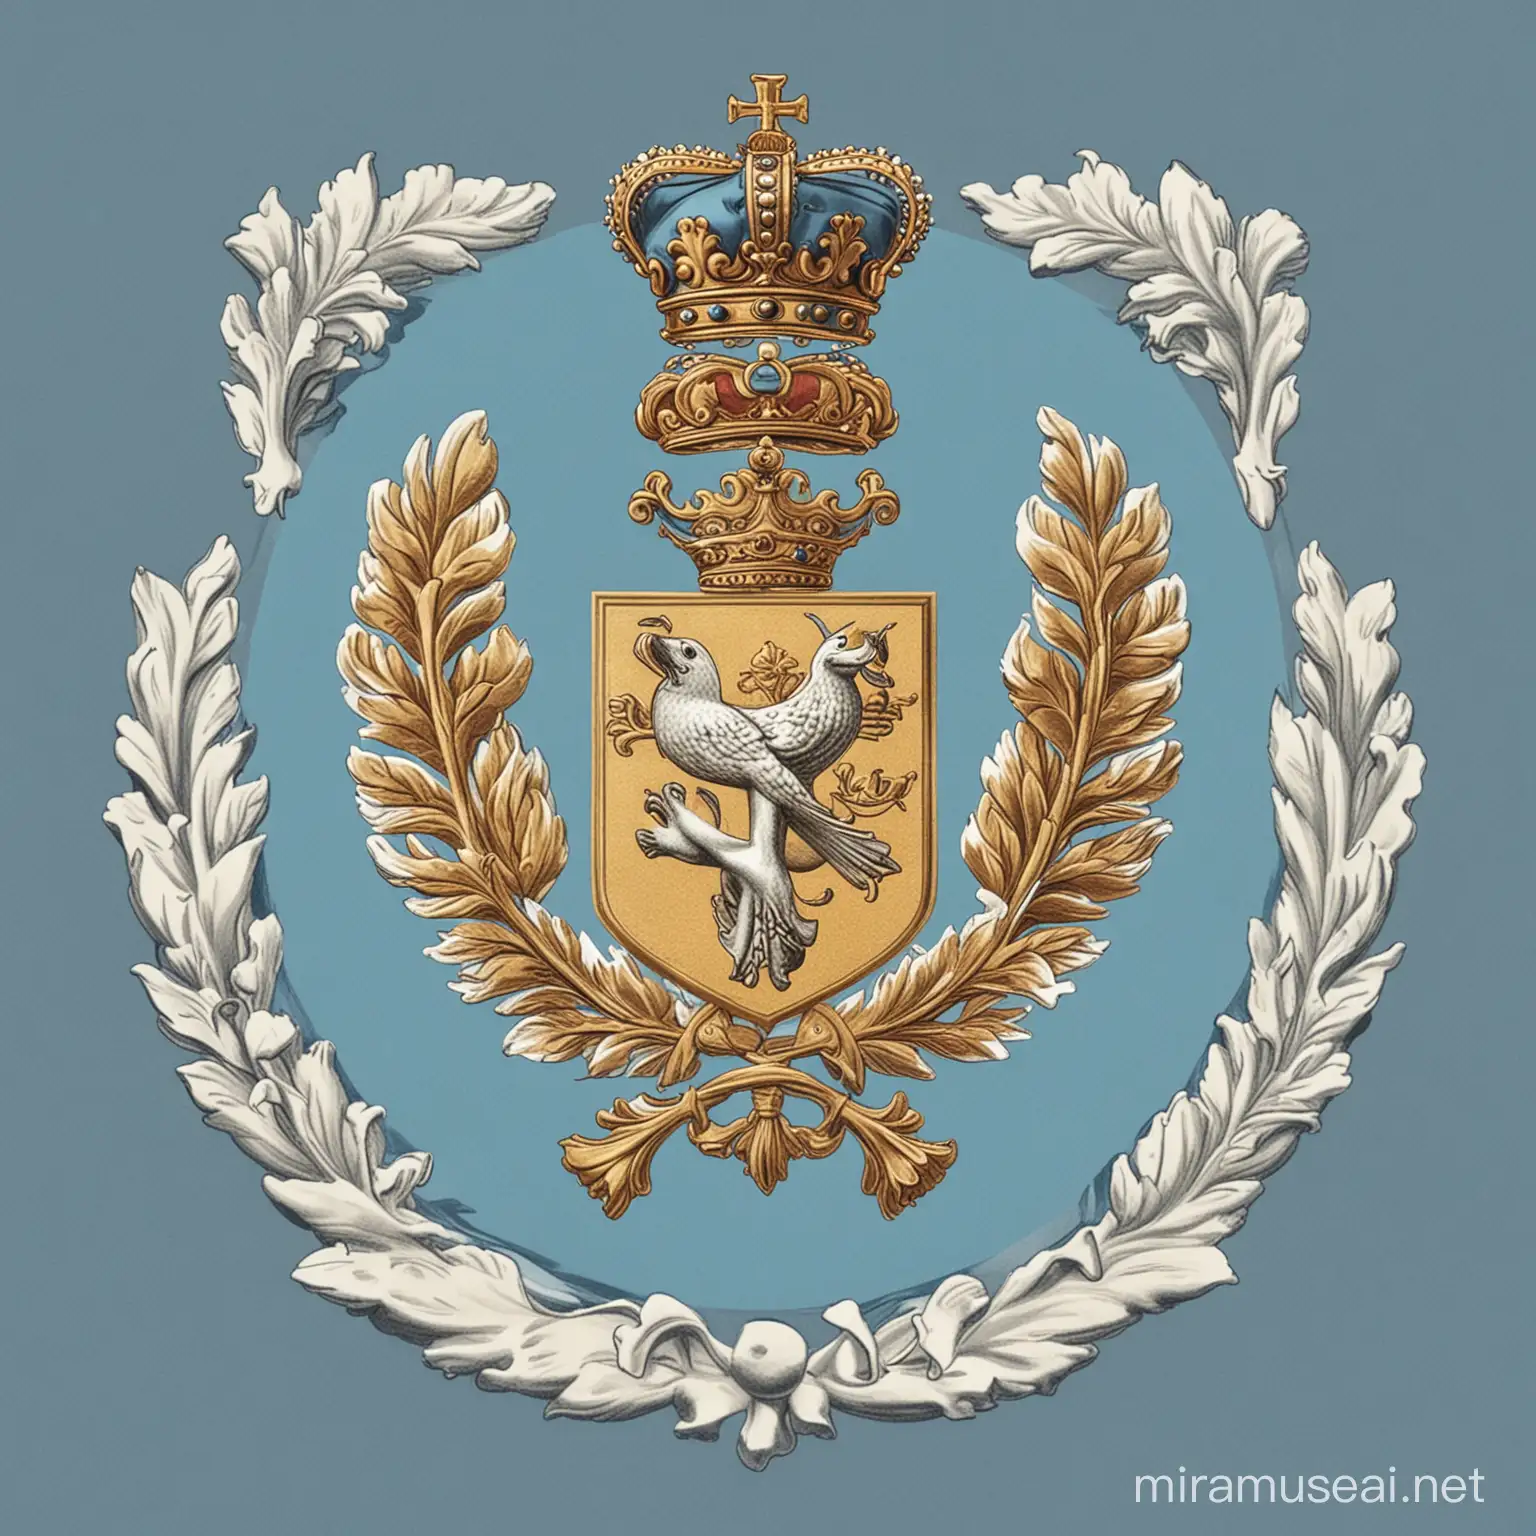 Can you make a coat of arms for a small cold country for by Antarctica, can you also include fat seals (preferably 2), British crown, leaf wreath and a crest up top. The main colors should be white, light blue and gold.